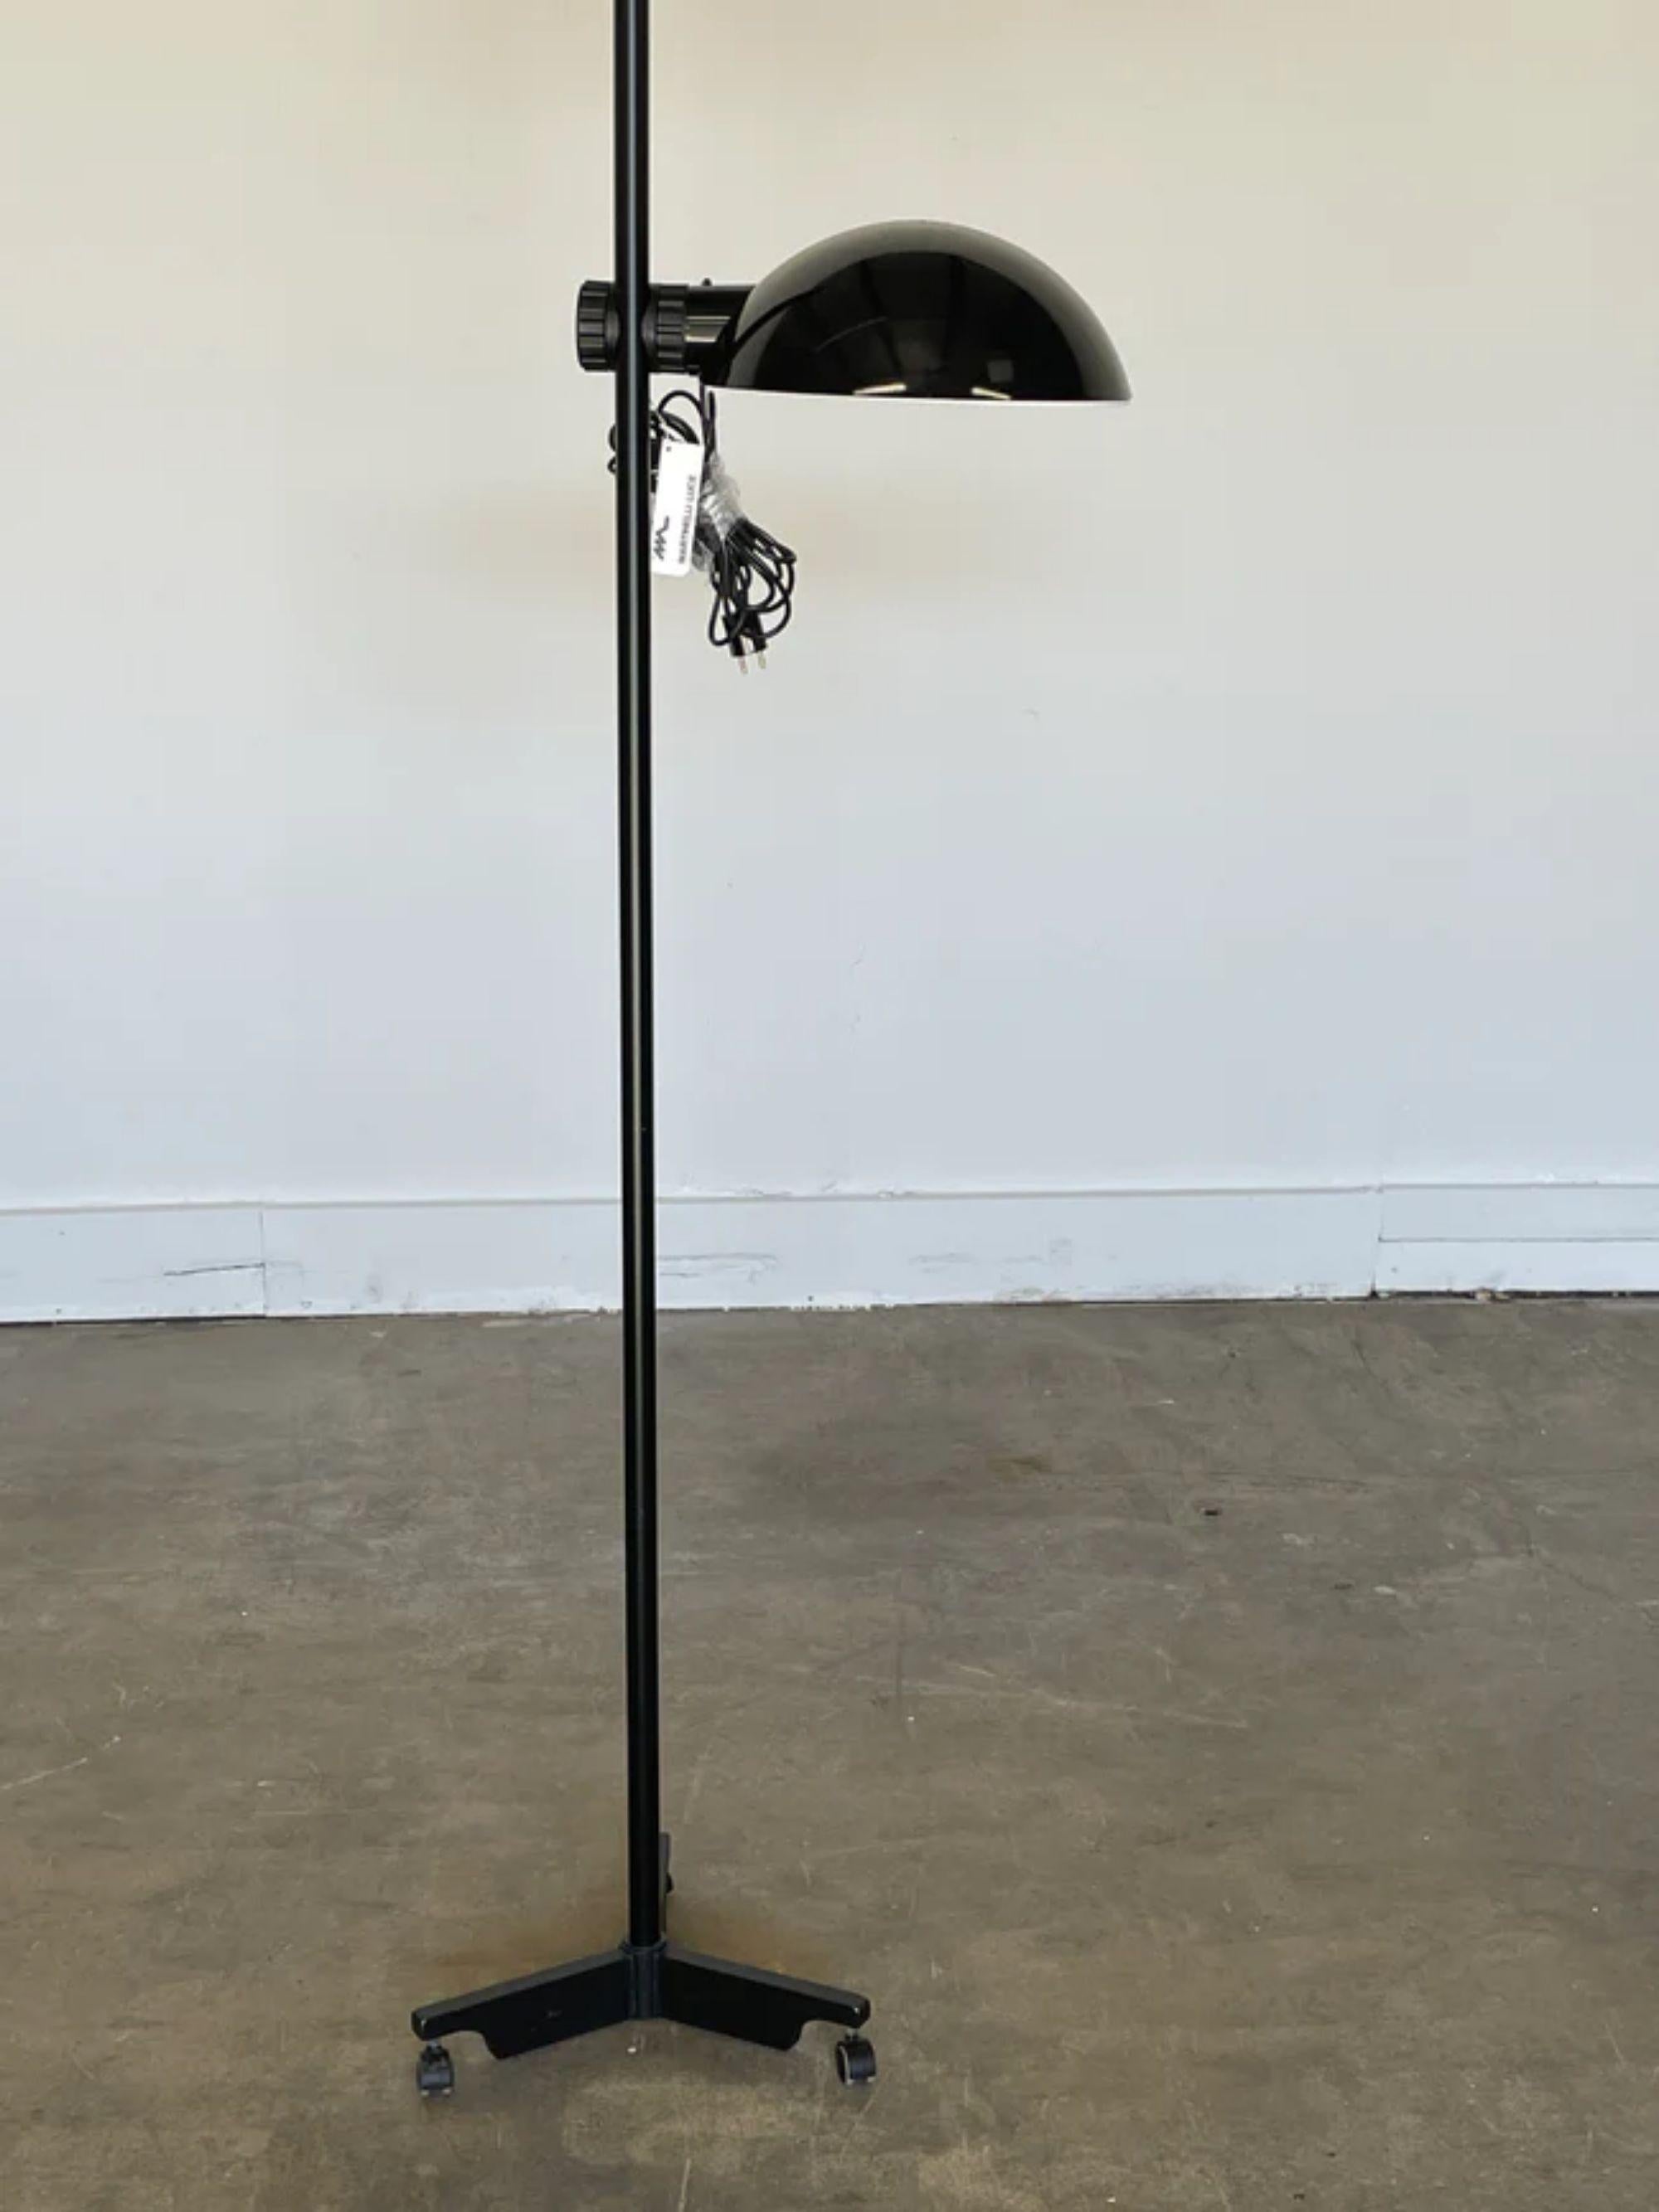 Elio Martinelli rare adjustable black floor lamp for Martinelli Luce, Italy, 1970s

Additional Information:
Materials: Enameled steel, aluminum, plastic
Condition: Very good vintage condition. May show some slight surface scratches. Tested and